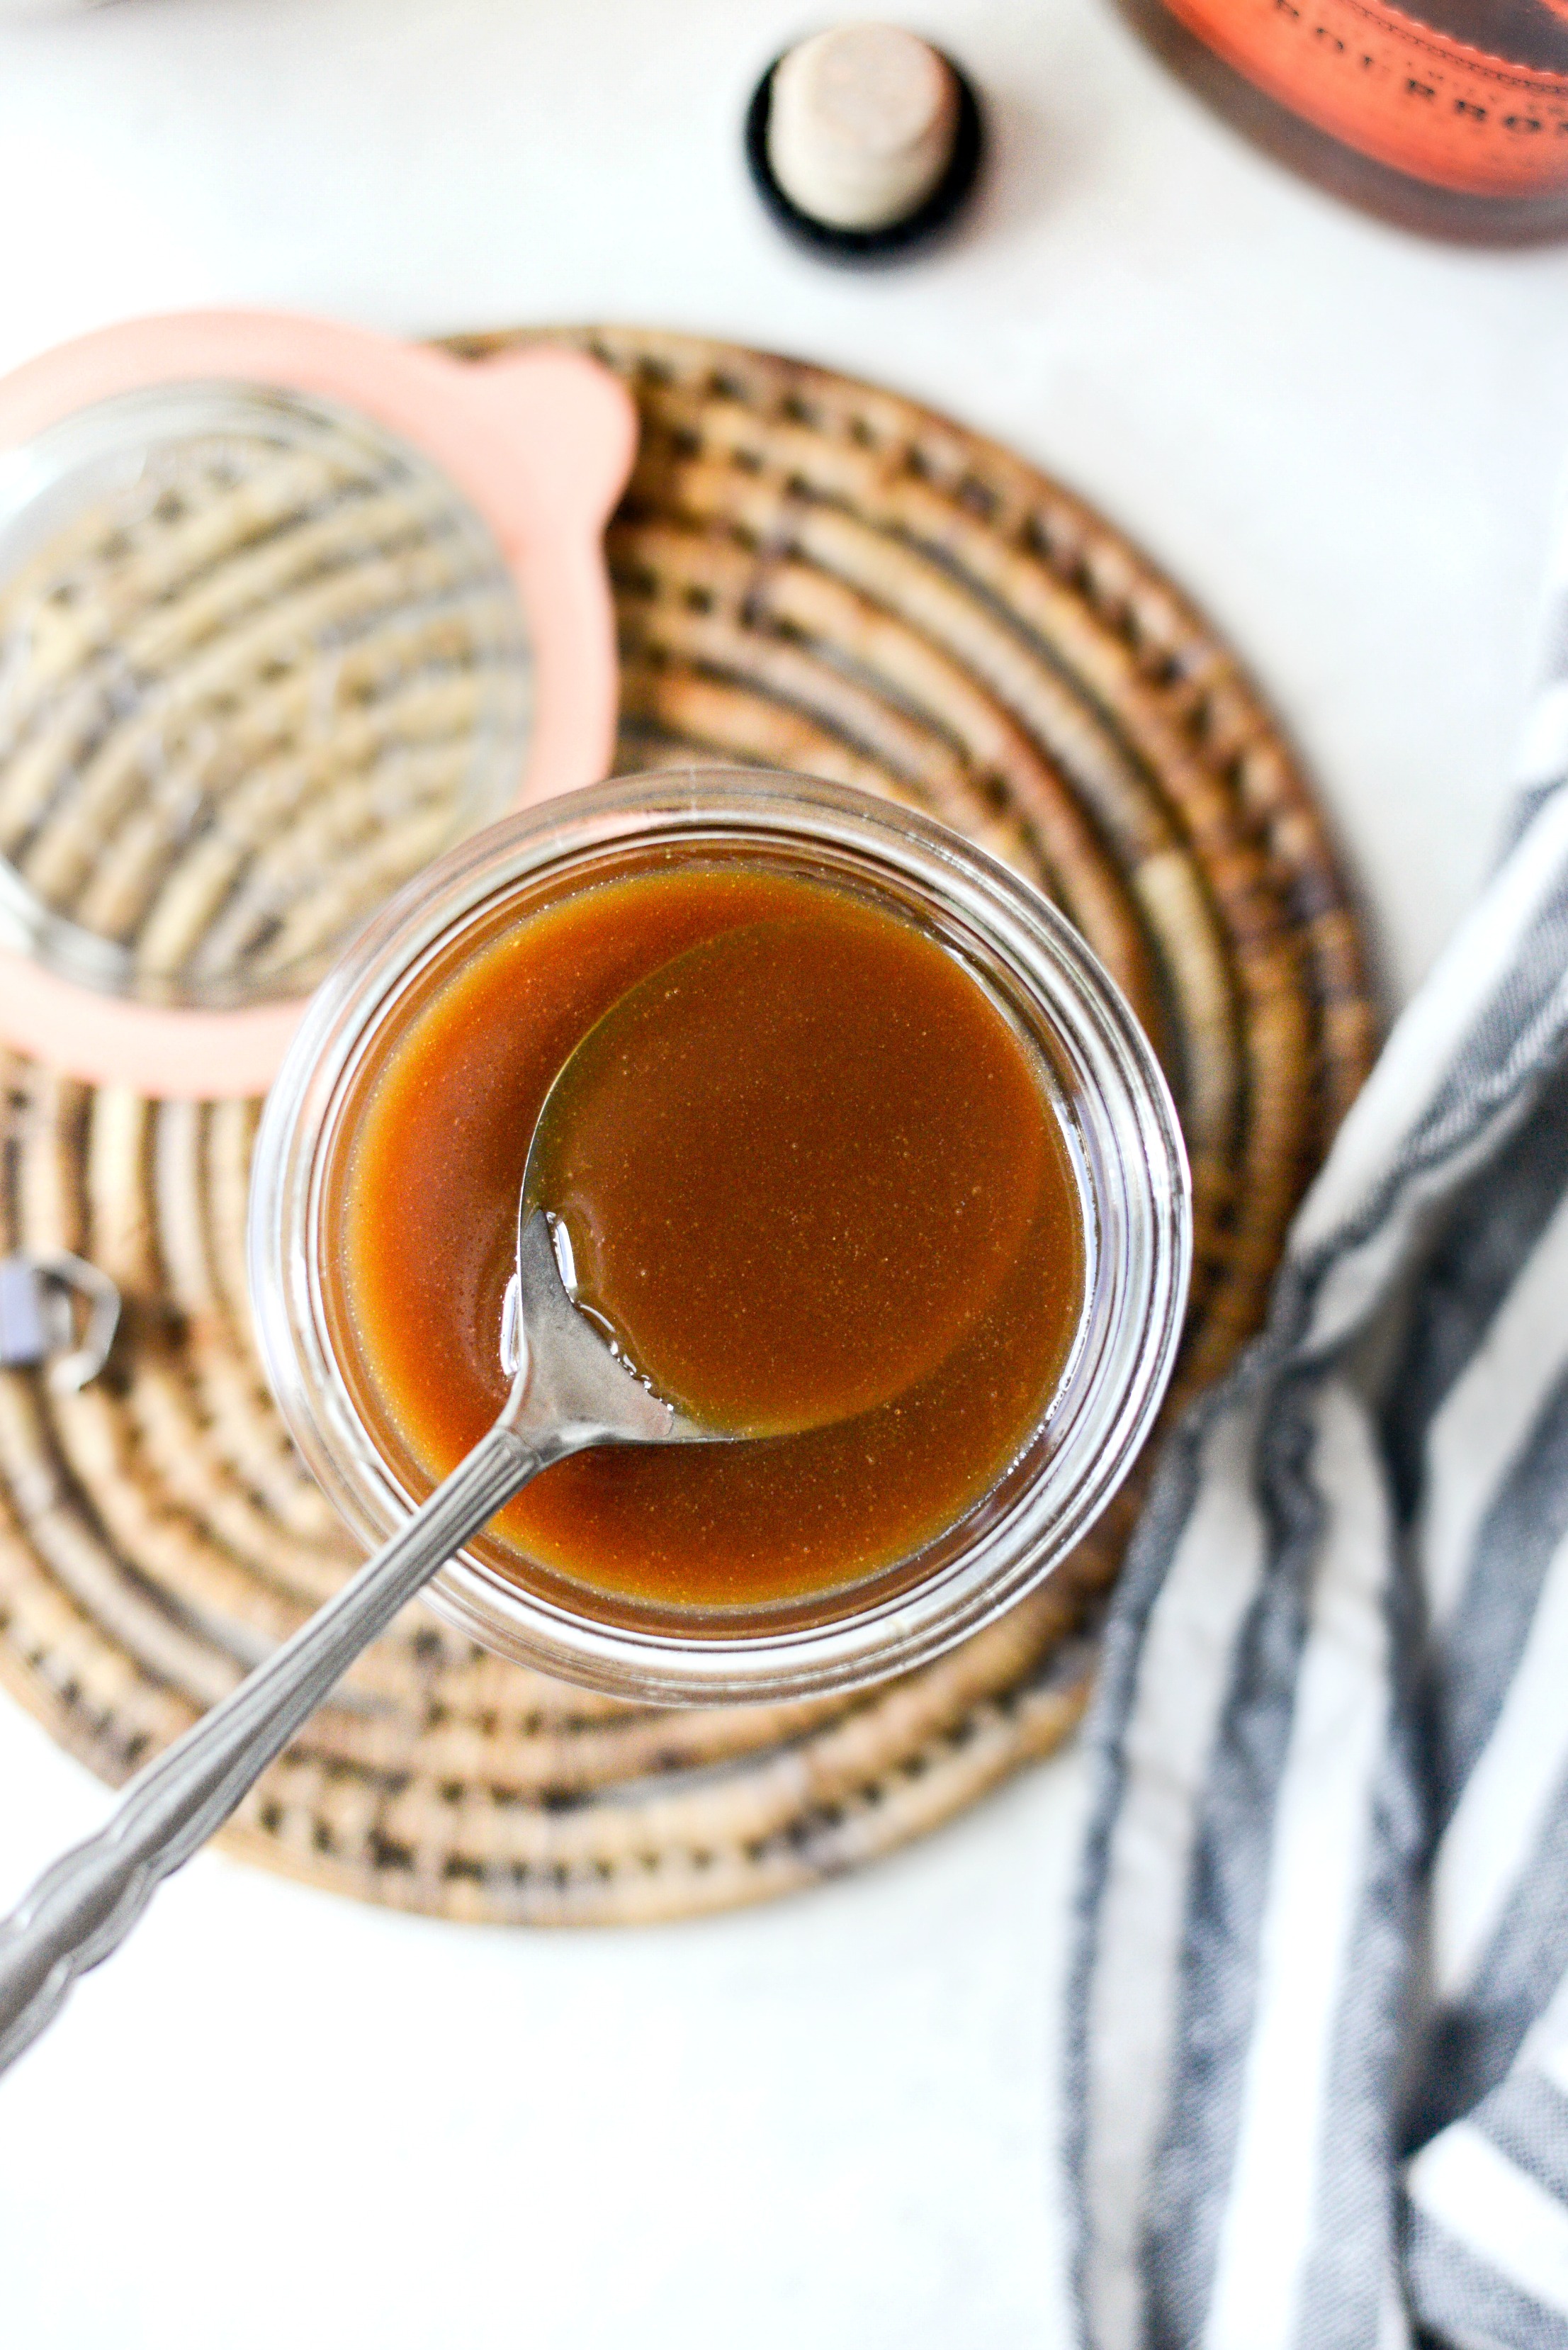 This Bourbon Caramel Sauce recipe is so delicious, you'll want to